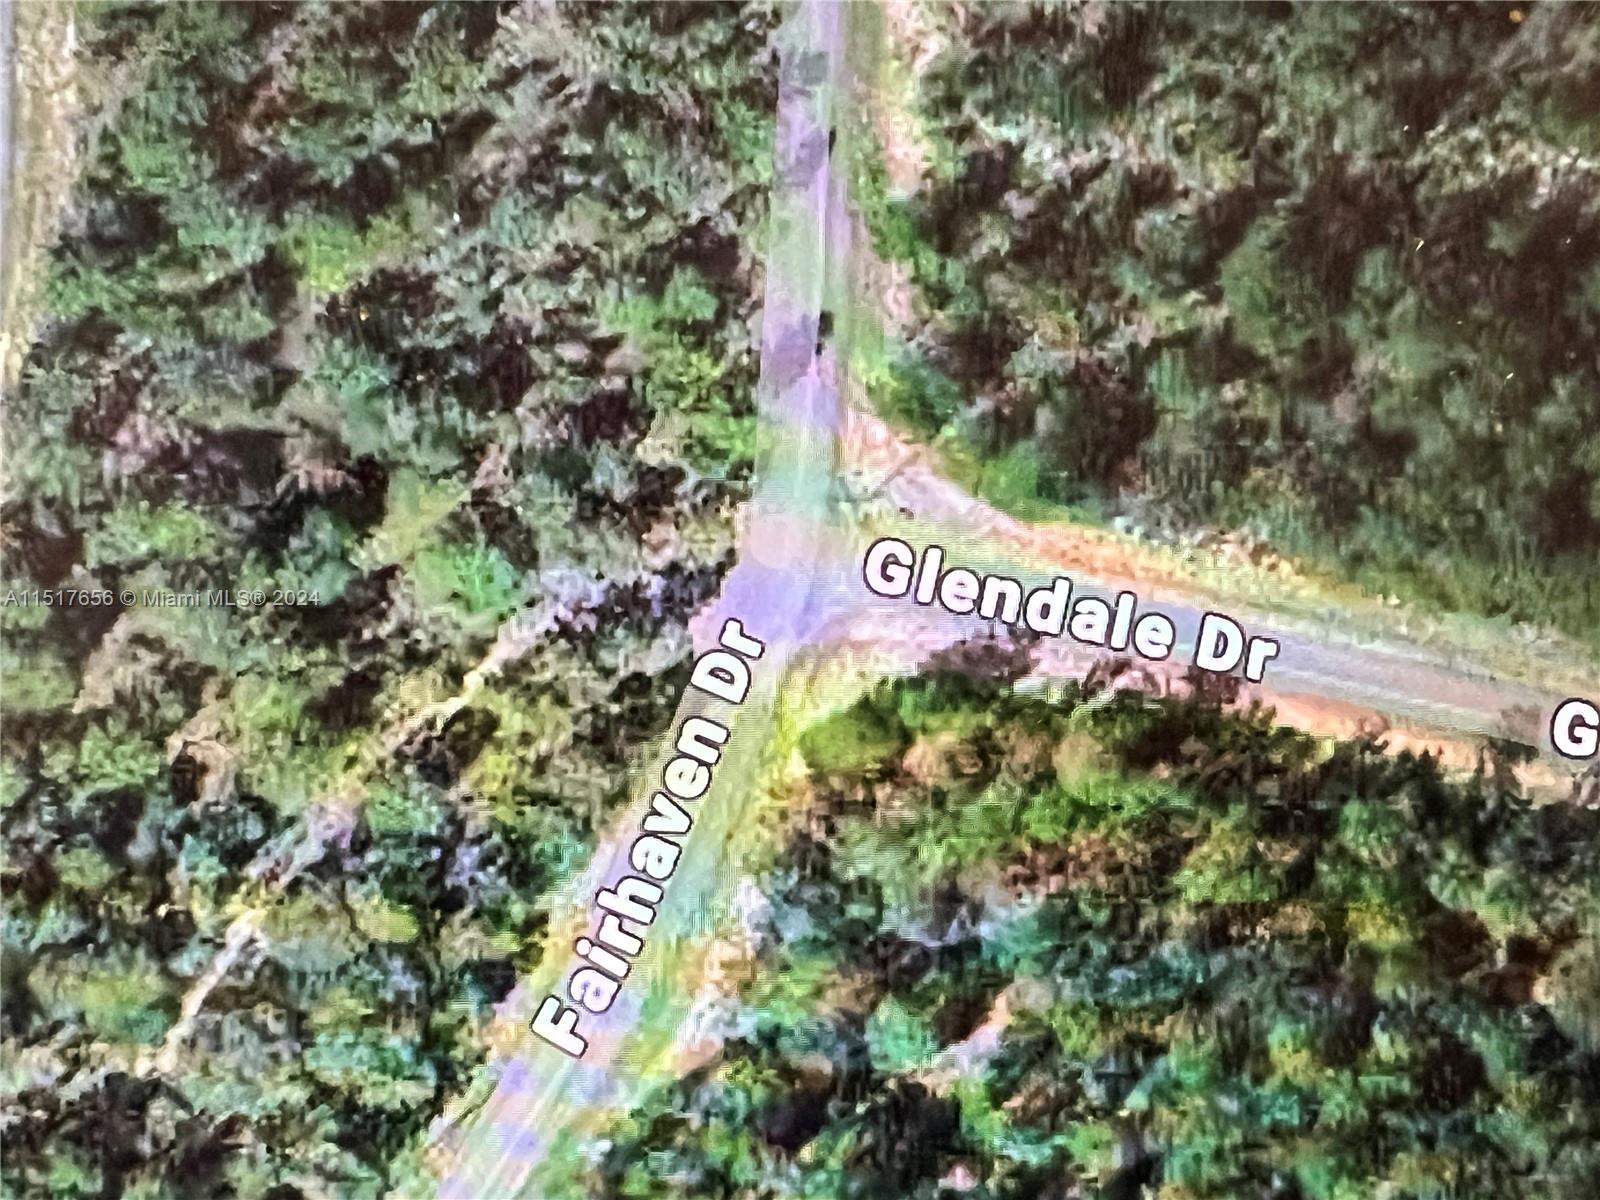 Photo of Fairhaven Dr N Glendel Dr in Other City - In The State Of Florid, FL